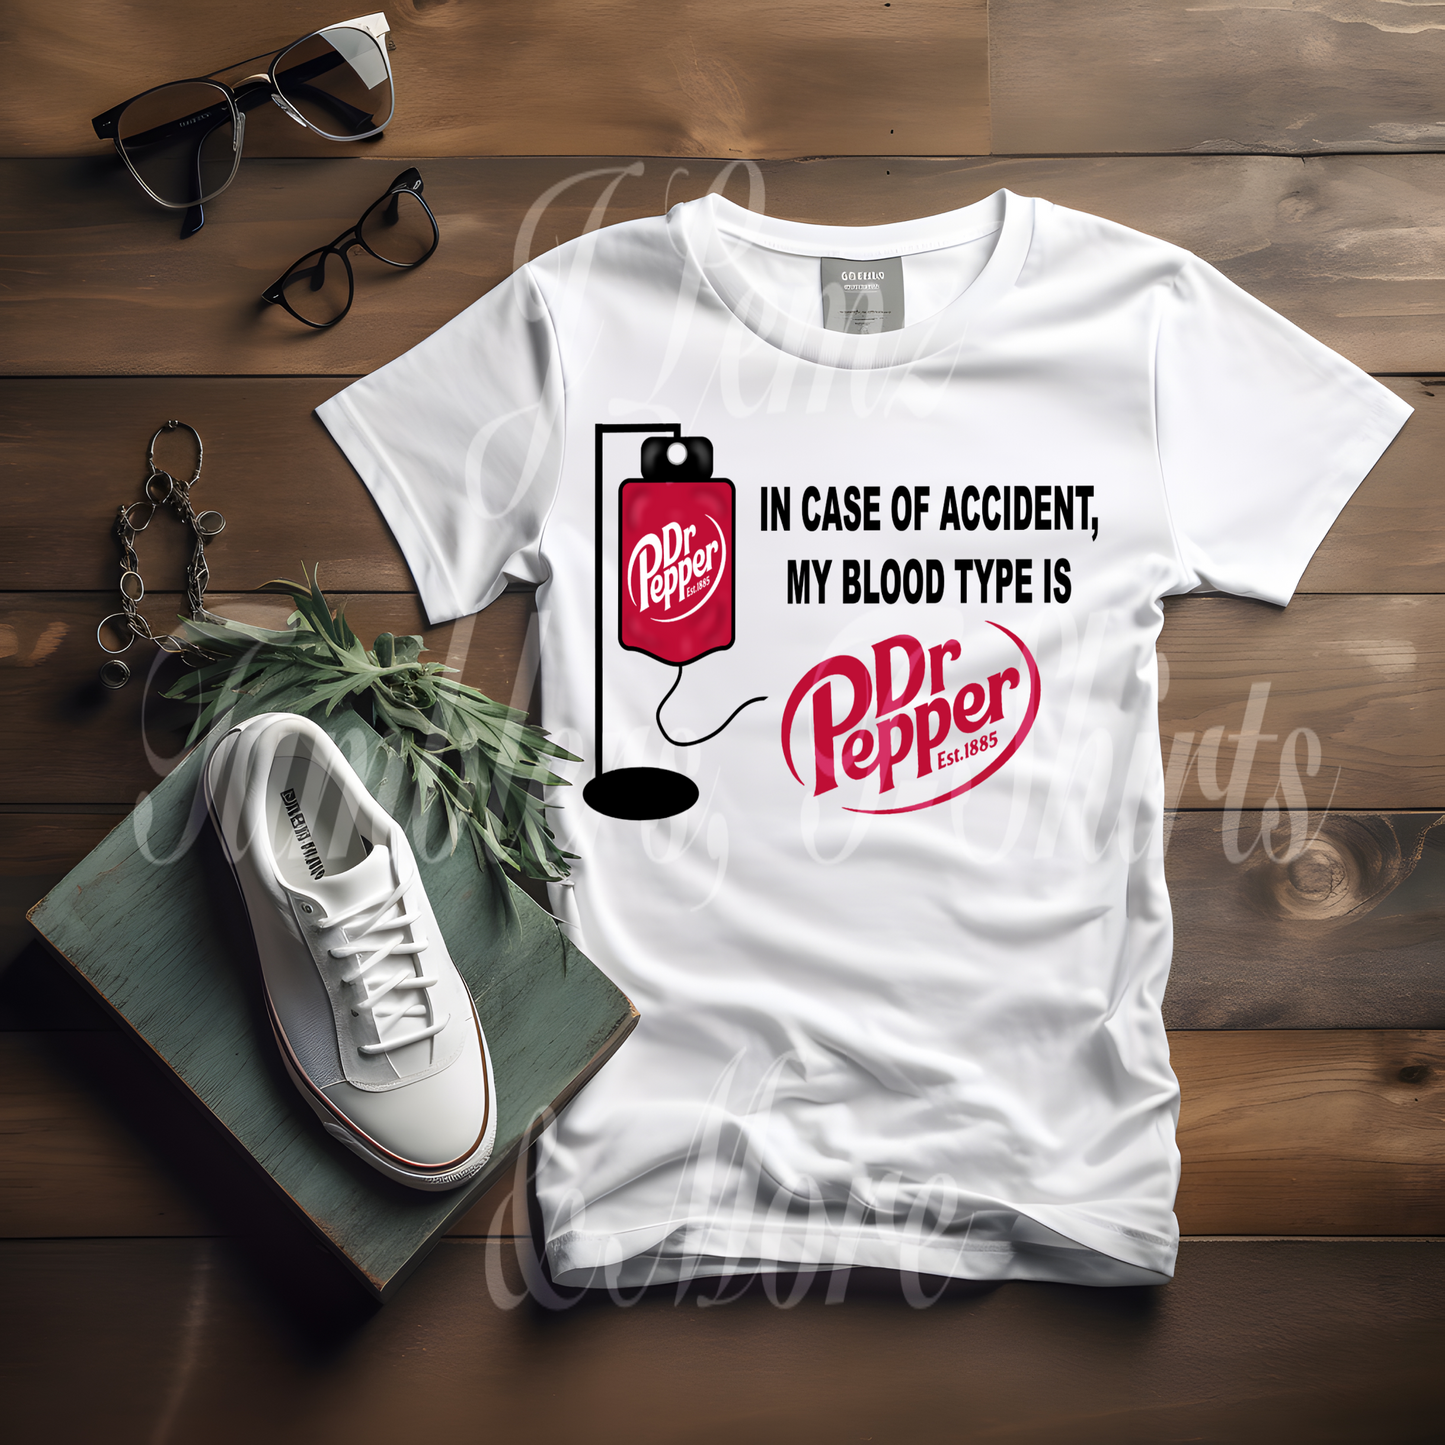 BLOOD TYPE IS DR. PEPPER